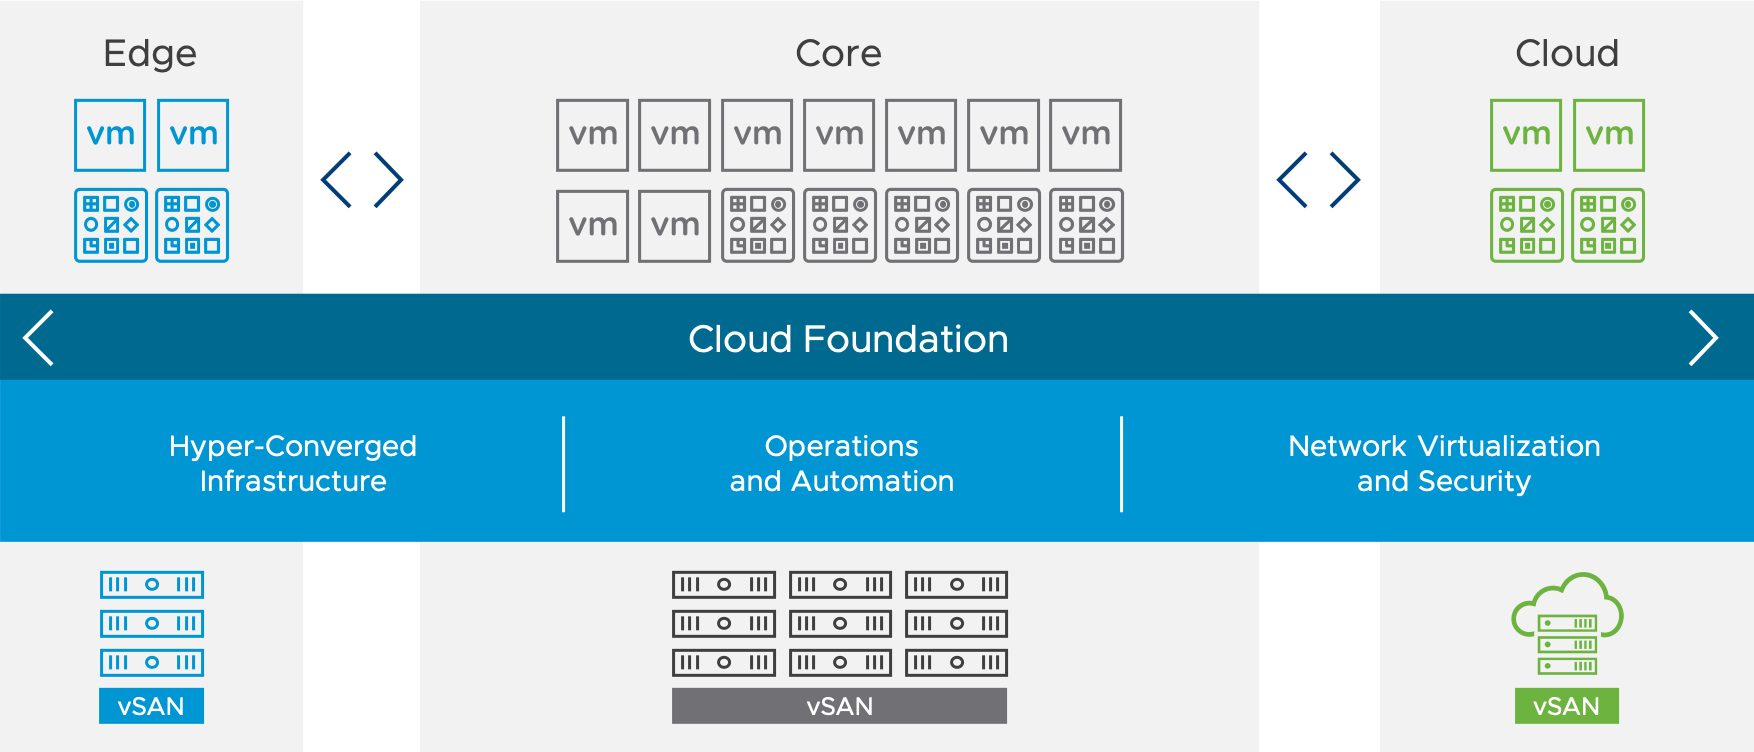 Cloud Foundation enables consistent infrastructure and operations